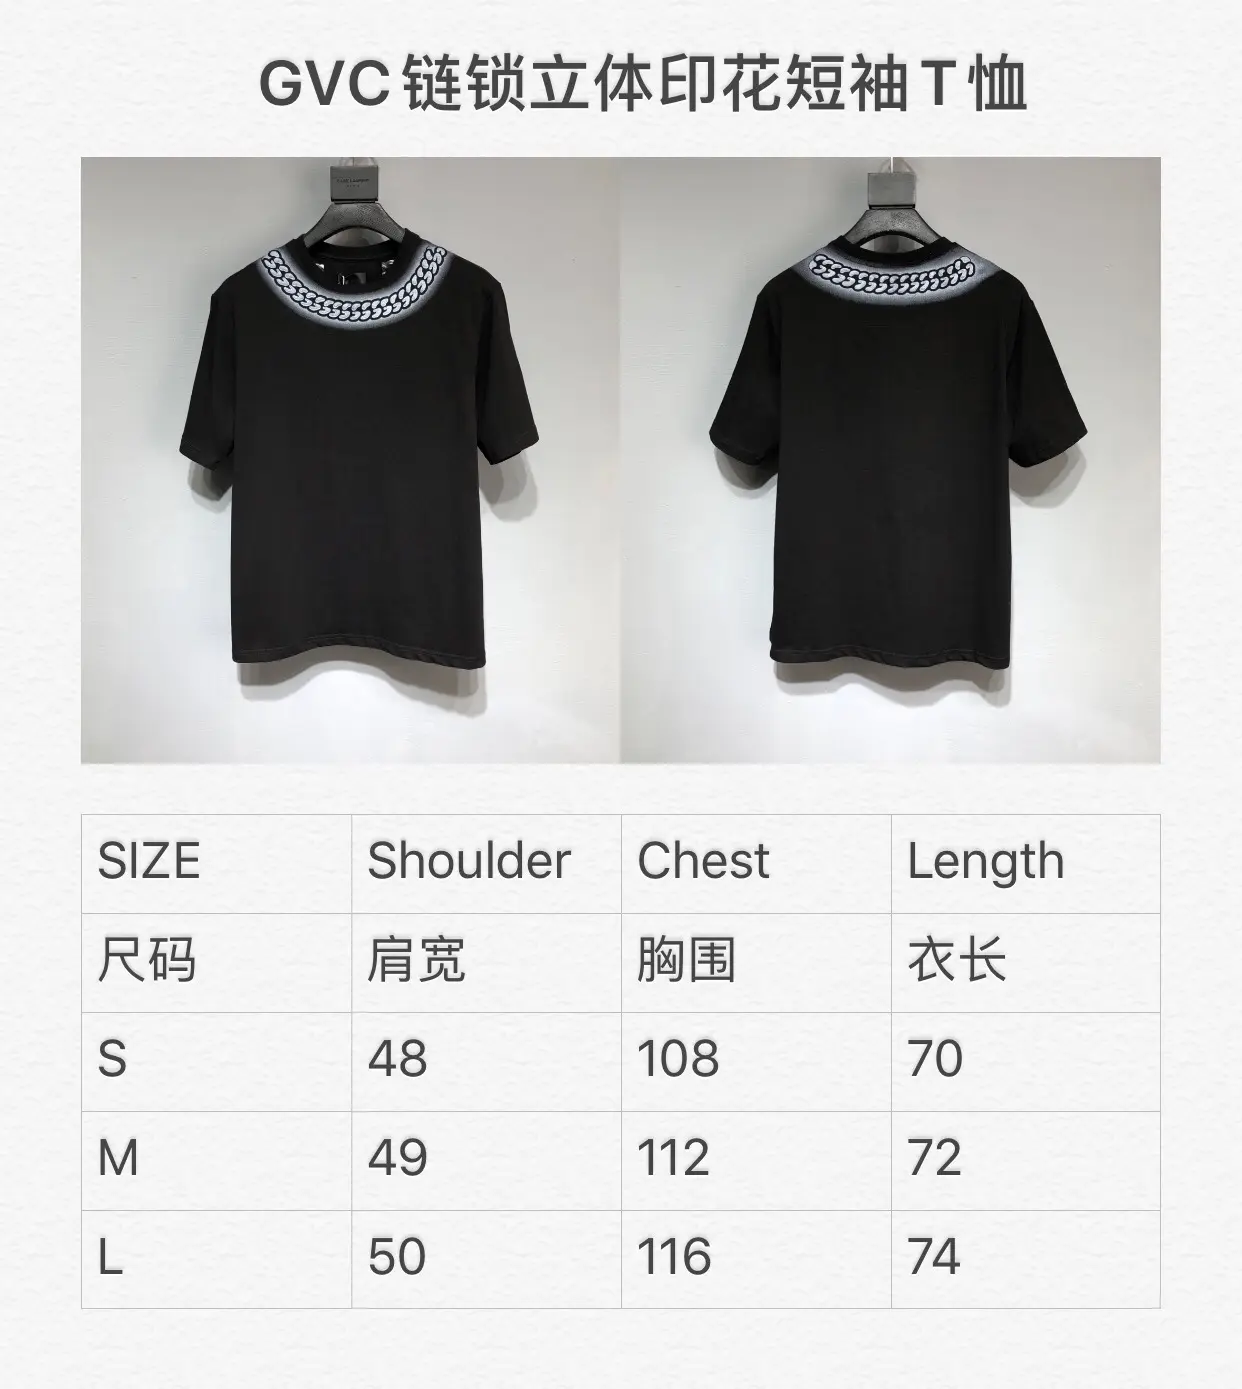 GIVENCHY 2022SS new arrival T-shirt in black